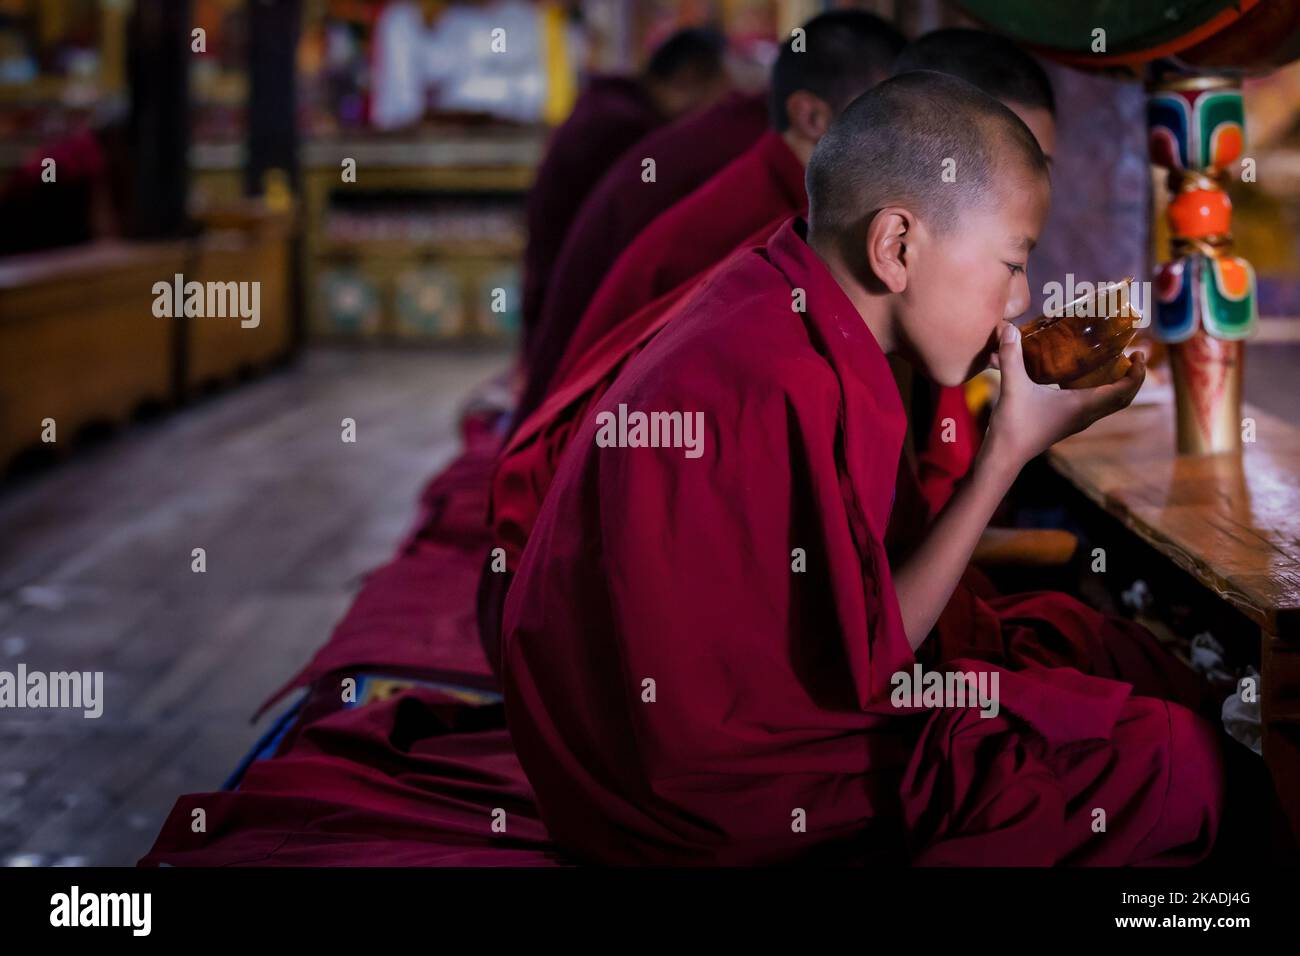 A young monk drinking tea during morning puja, Thikse Monastery (Thiksay Gompa), Ladakh, India Stock Photo